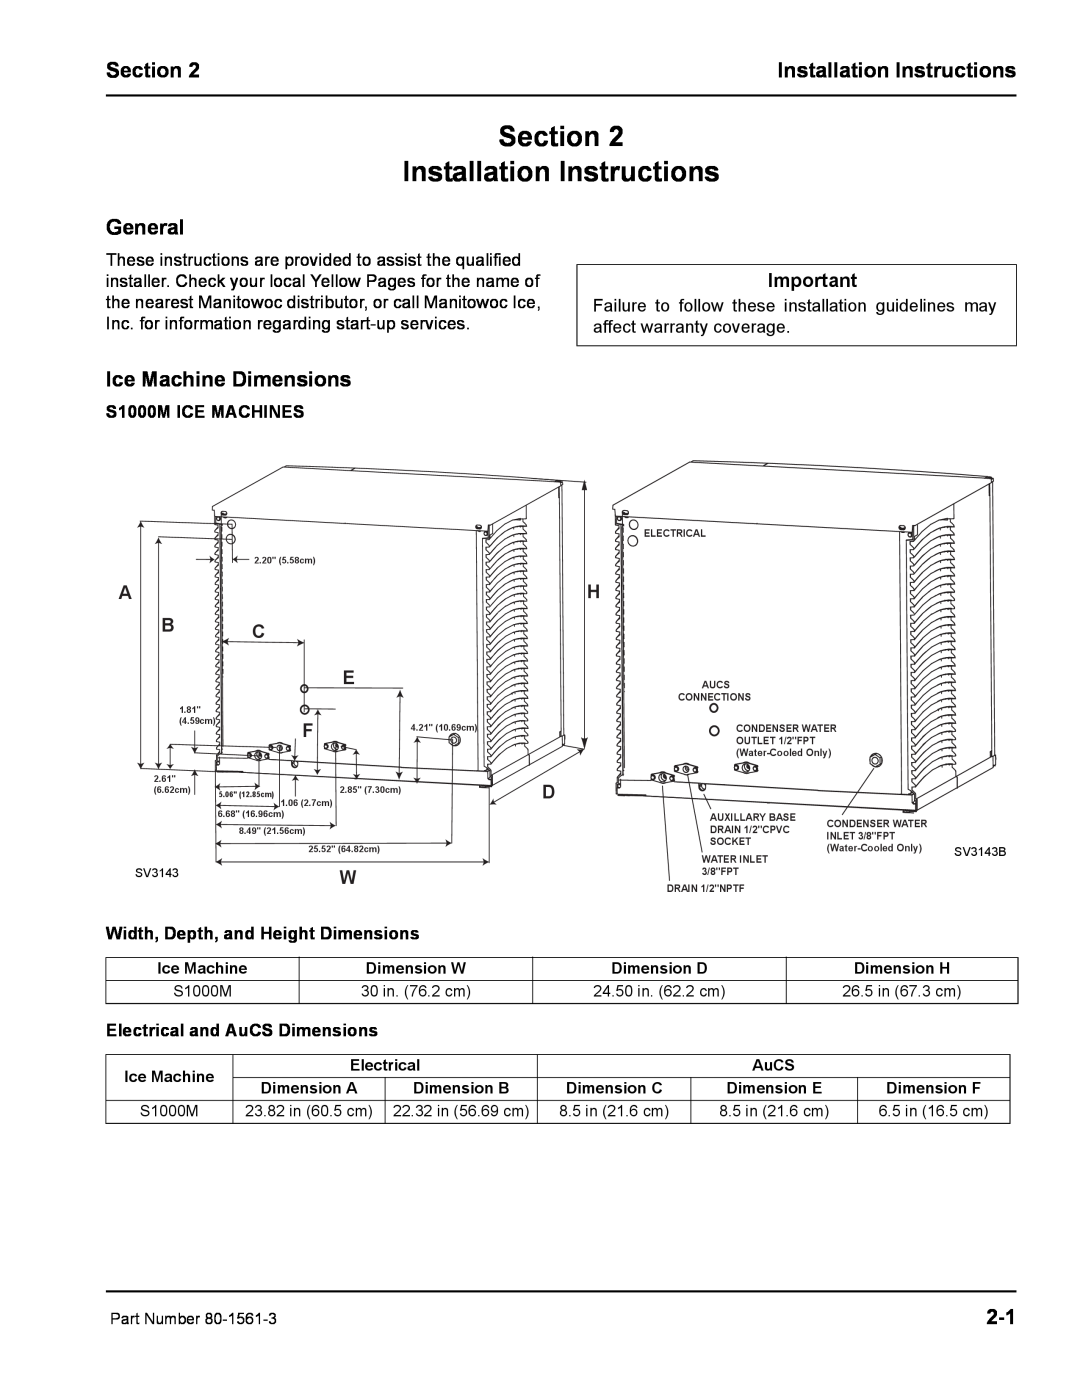 Manitowoc Ice manual Section Installation Instructions, General, Ice Machine Dimensions, S1000M ICE MACHINES 